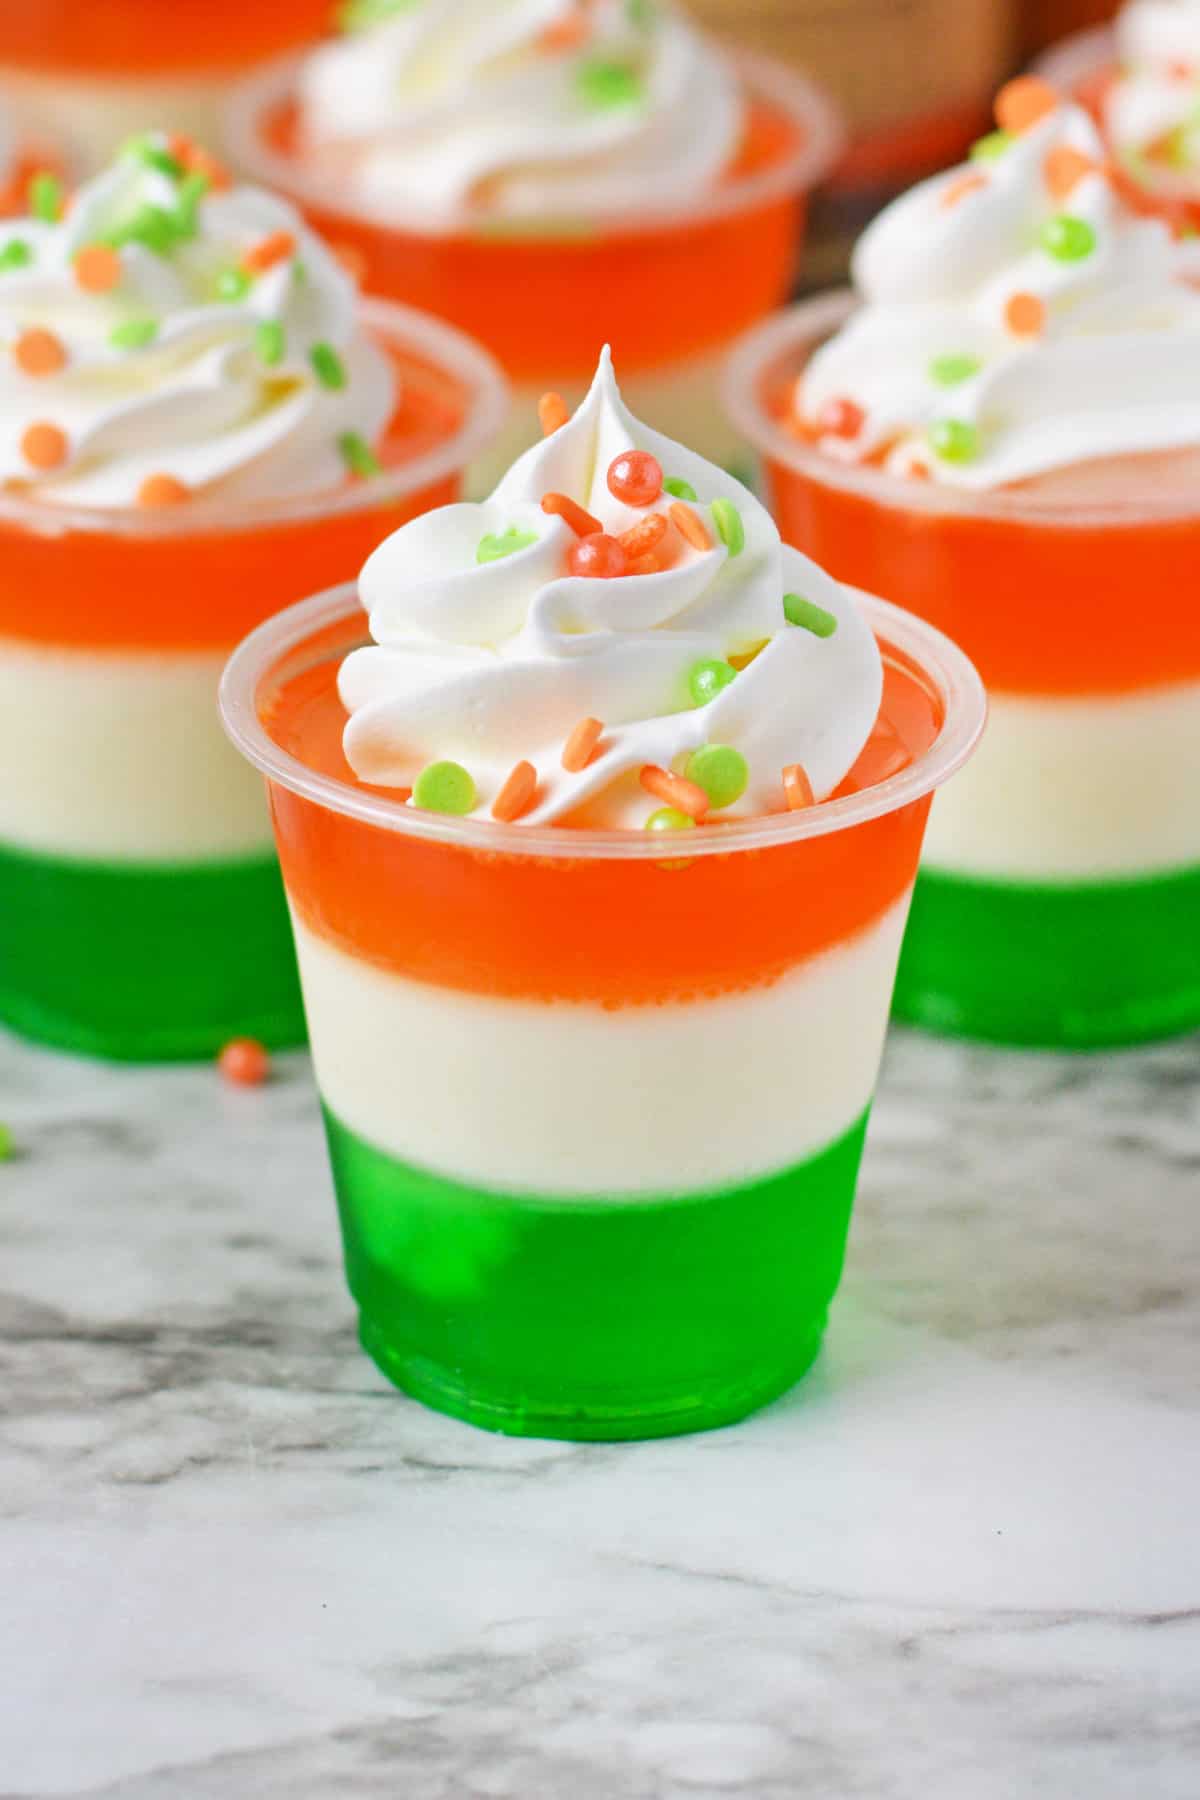 St. Patrick's Day jello shots made with a green bottom layer, white middle layer, and orange top layer, and whipped cream and festive sprinkles.